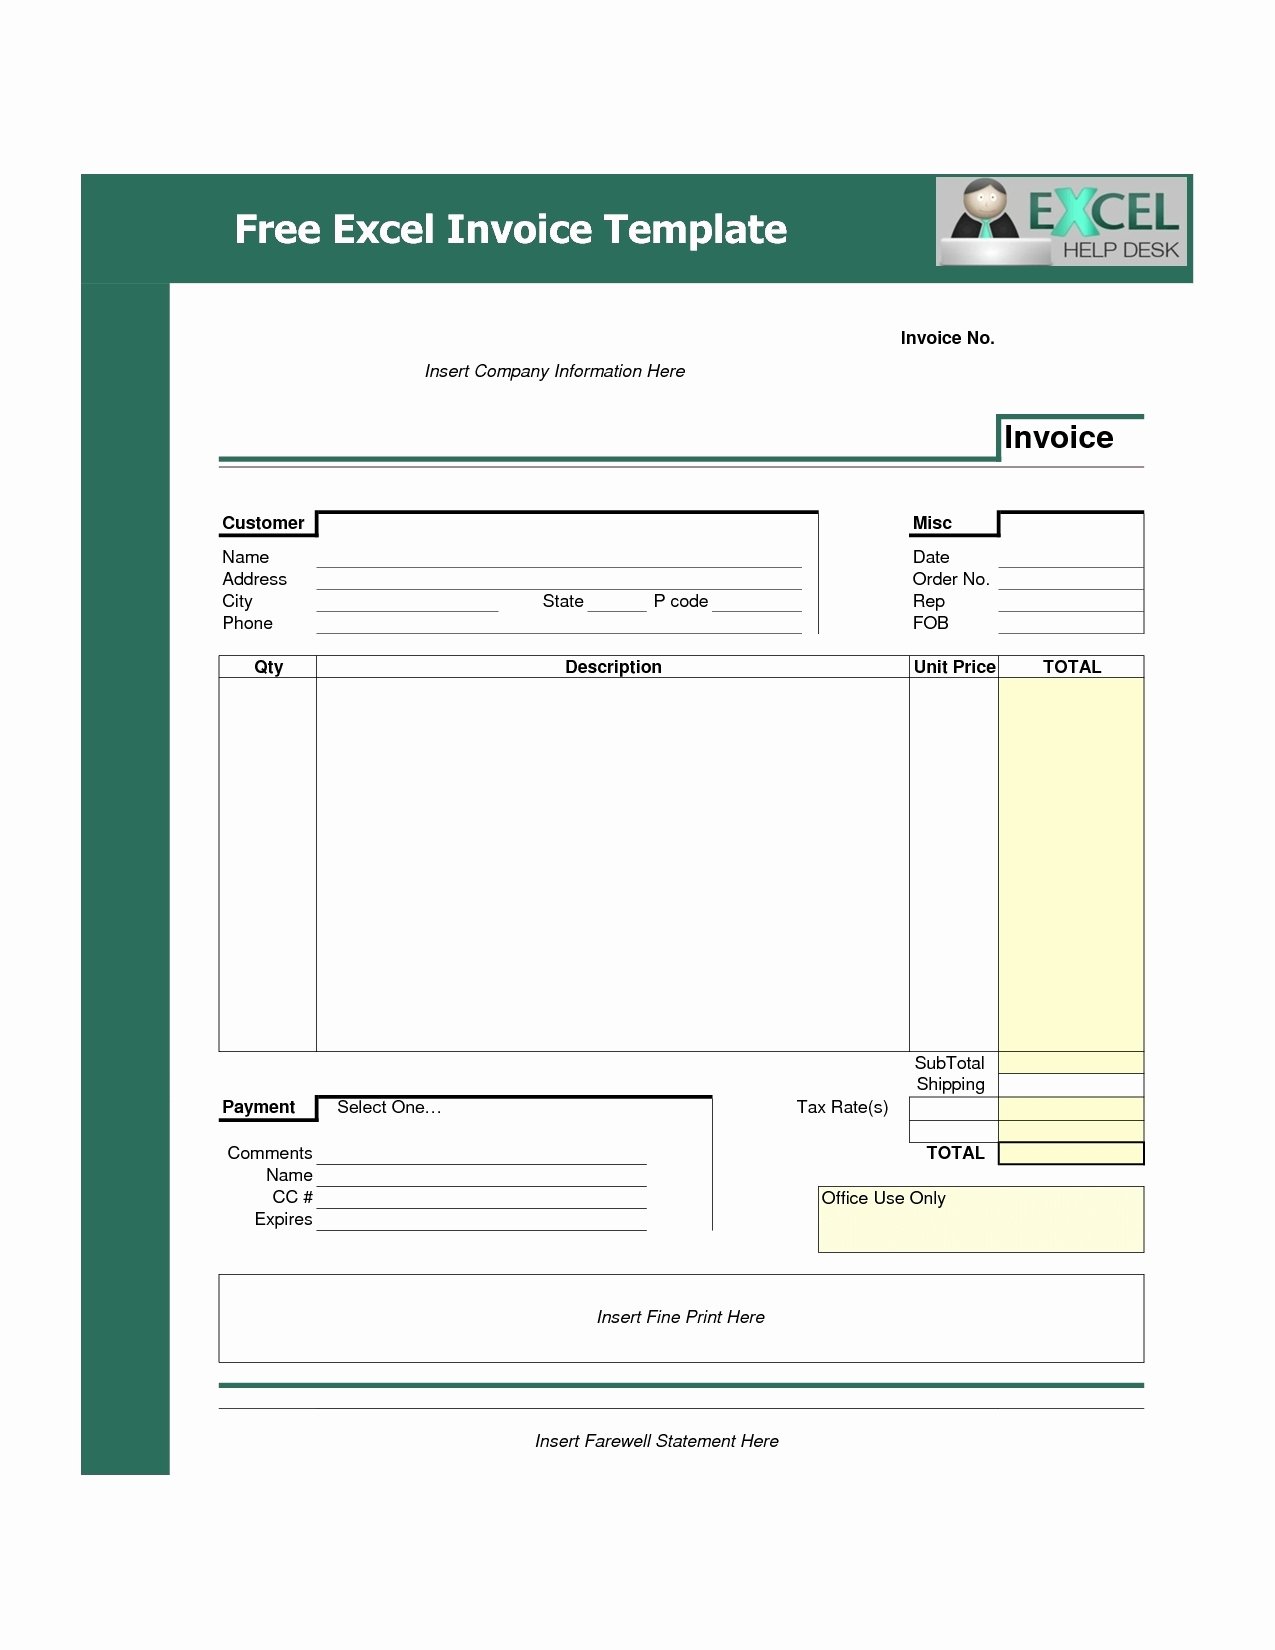 Free Downloadable Invoice Template Luxury Invoice Template Free Download Excel Invoice Template Ideas